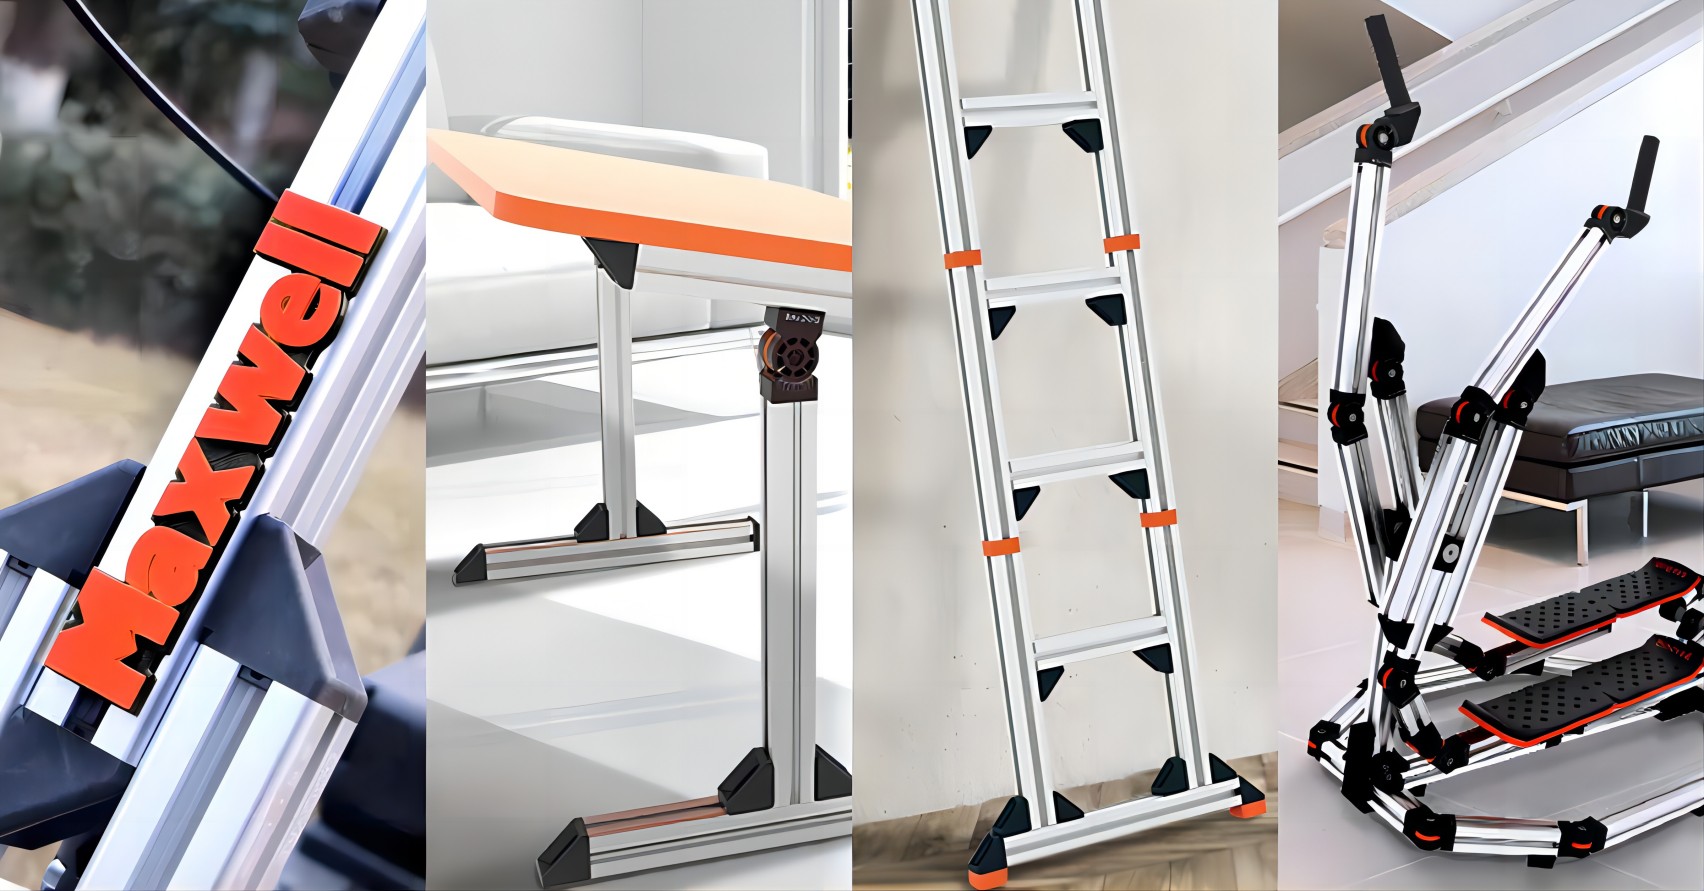 Docyke: The Most Versatile Product in the World